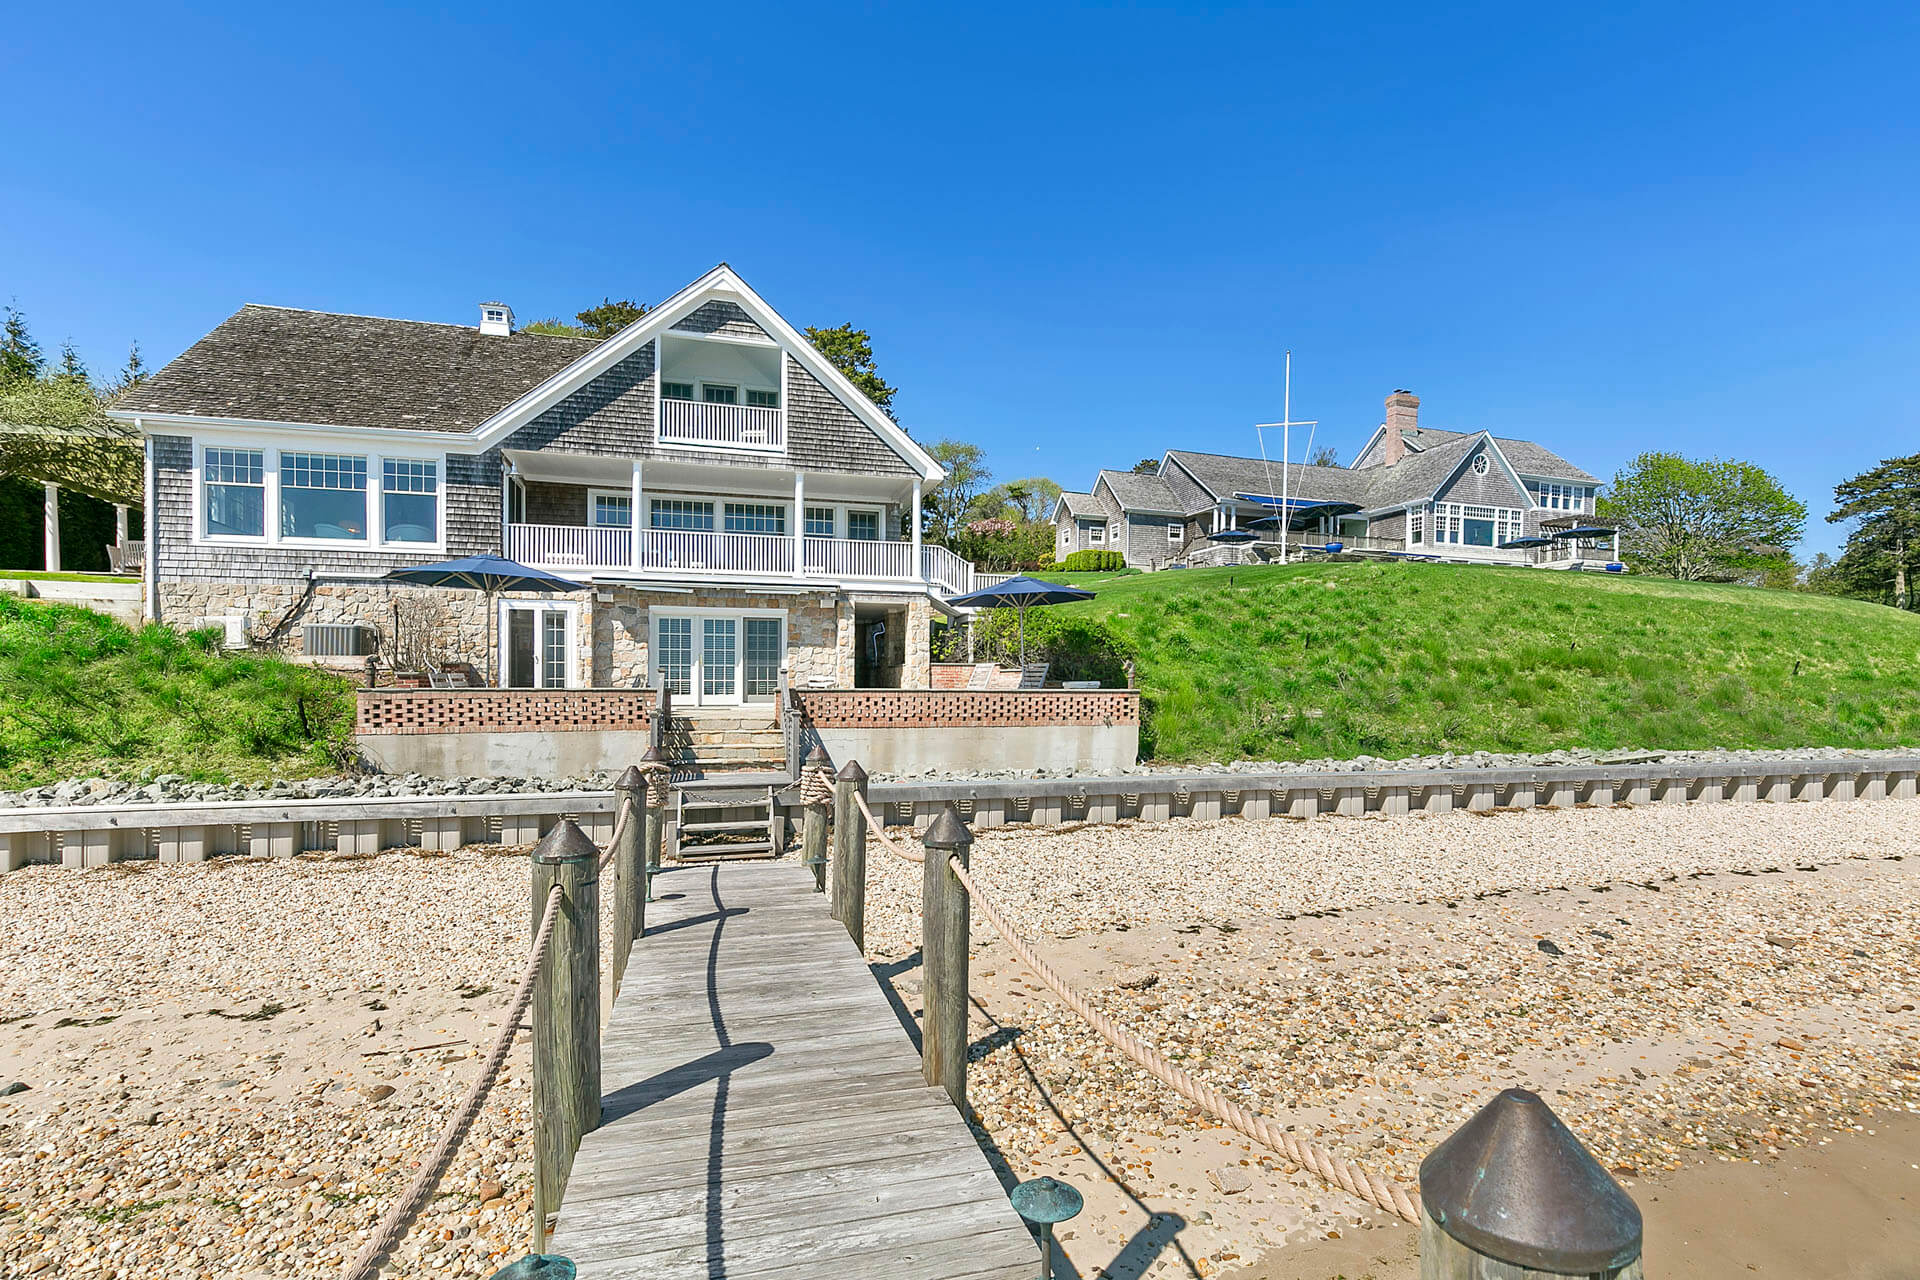 Guest house with a dock and beach in The Hamptons